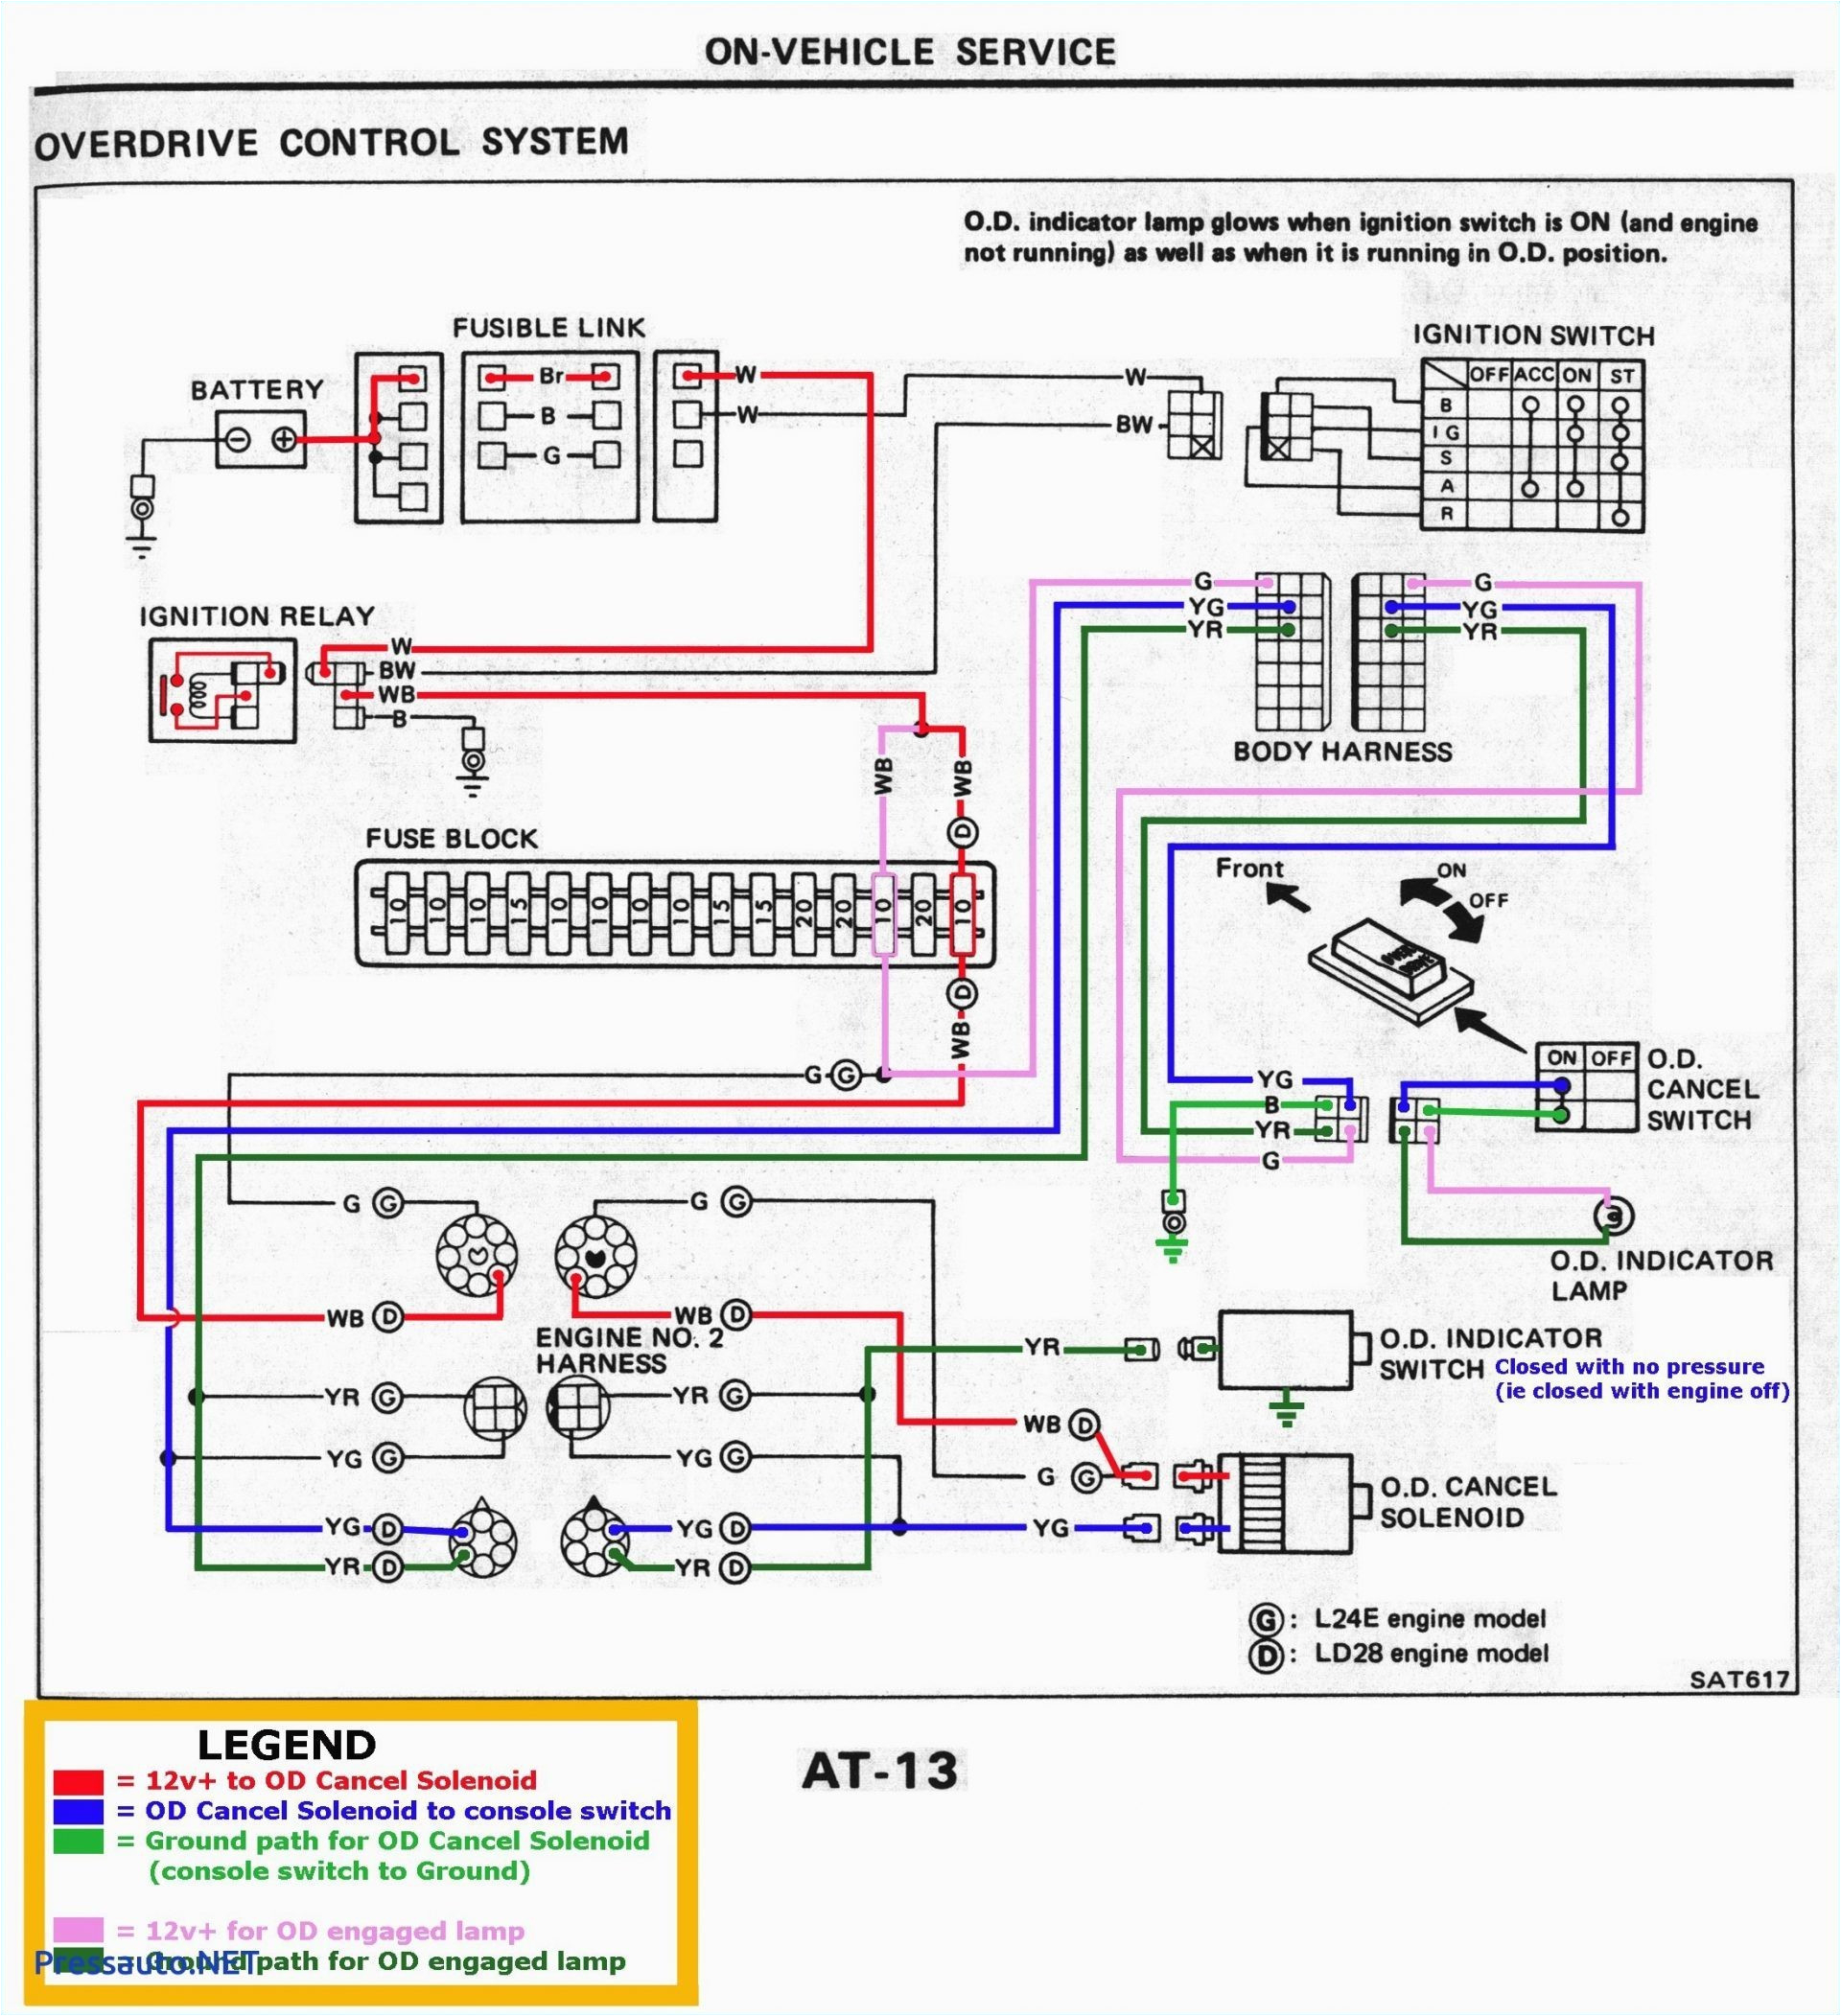 electrical schematic wiring color wiring diagram review color n electrical diagram wiring diagram user color n